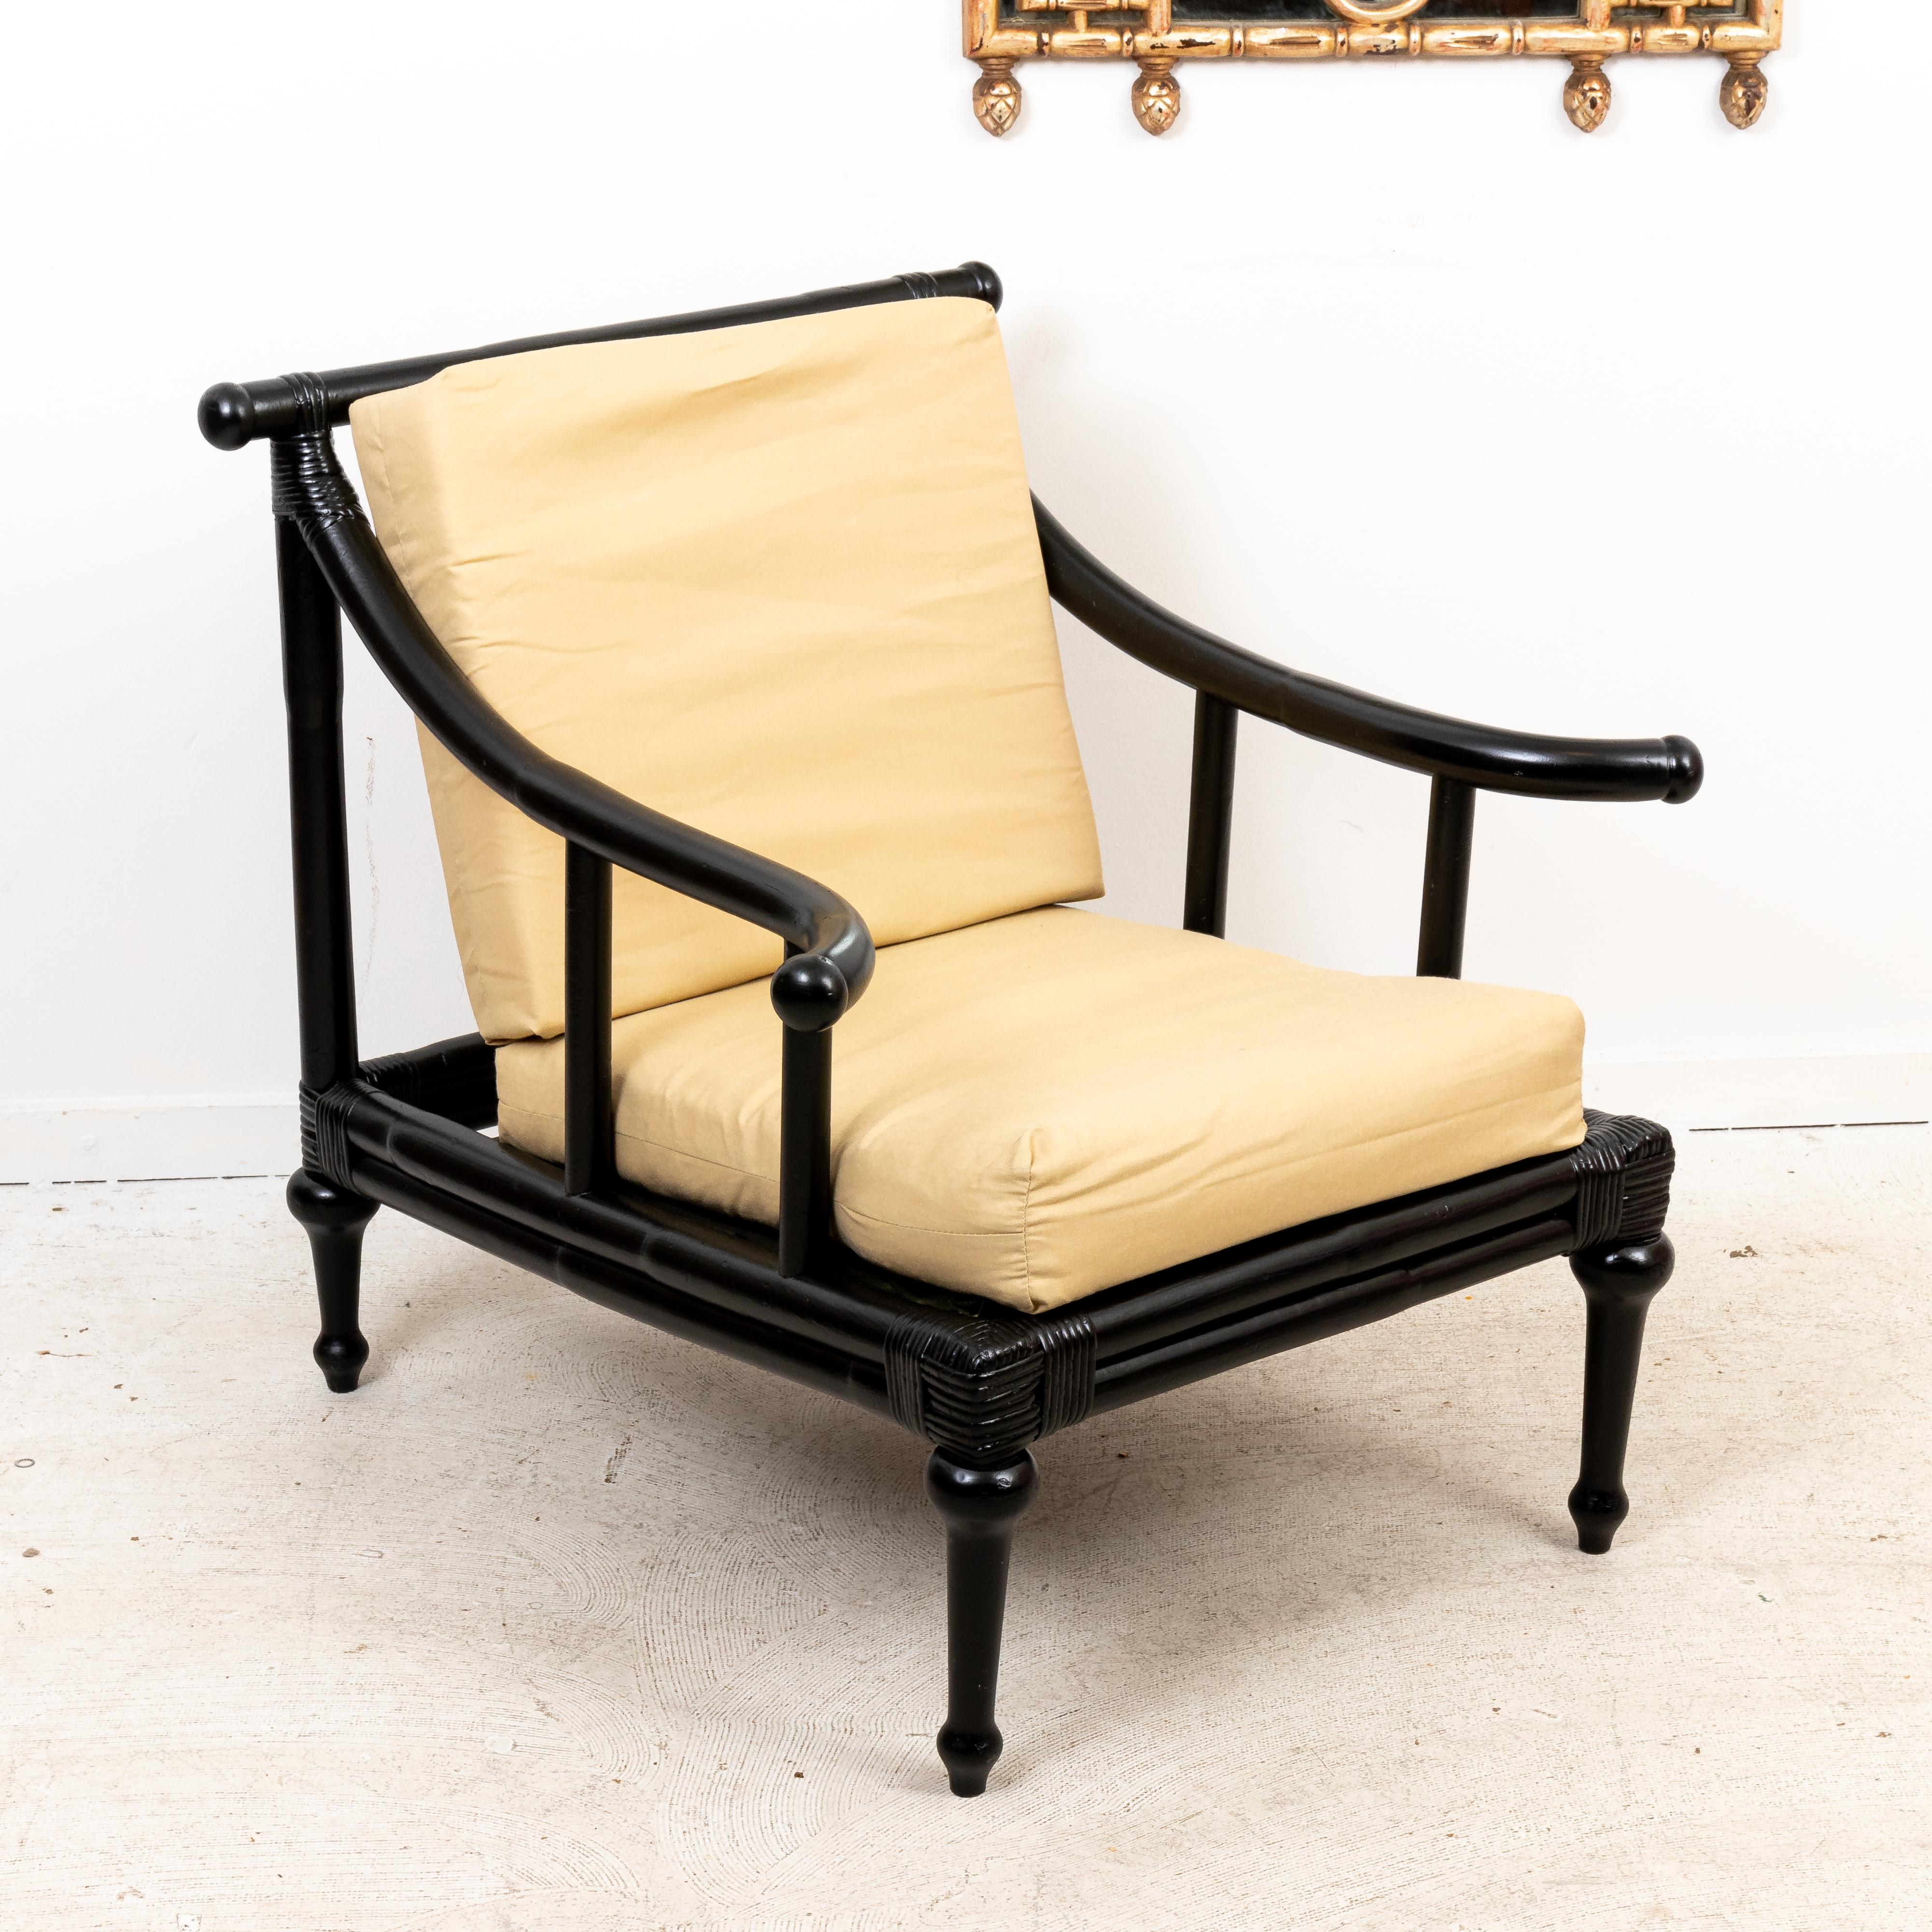 Circa mid-20th century Asian style rattan lounge chair and ottoman with black painted finish on ball turned legs. Made in the United States. Please note of wear consistent with age. The cushions are only stapled closed, they may need to be